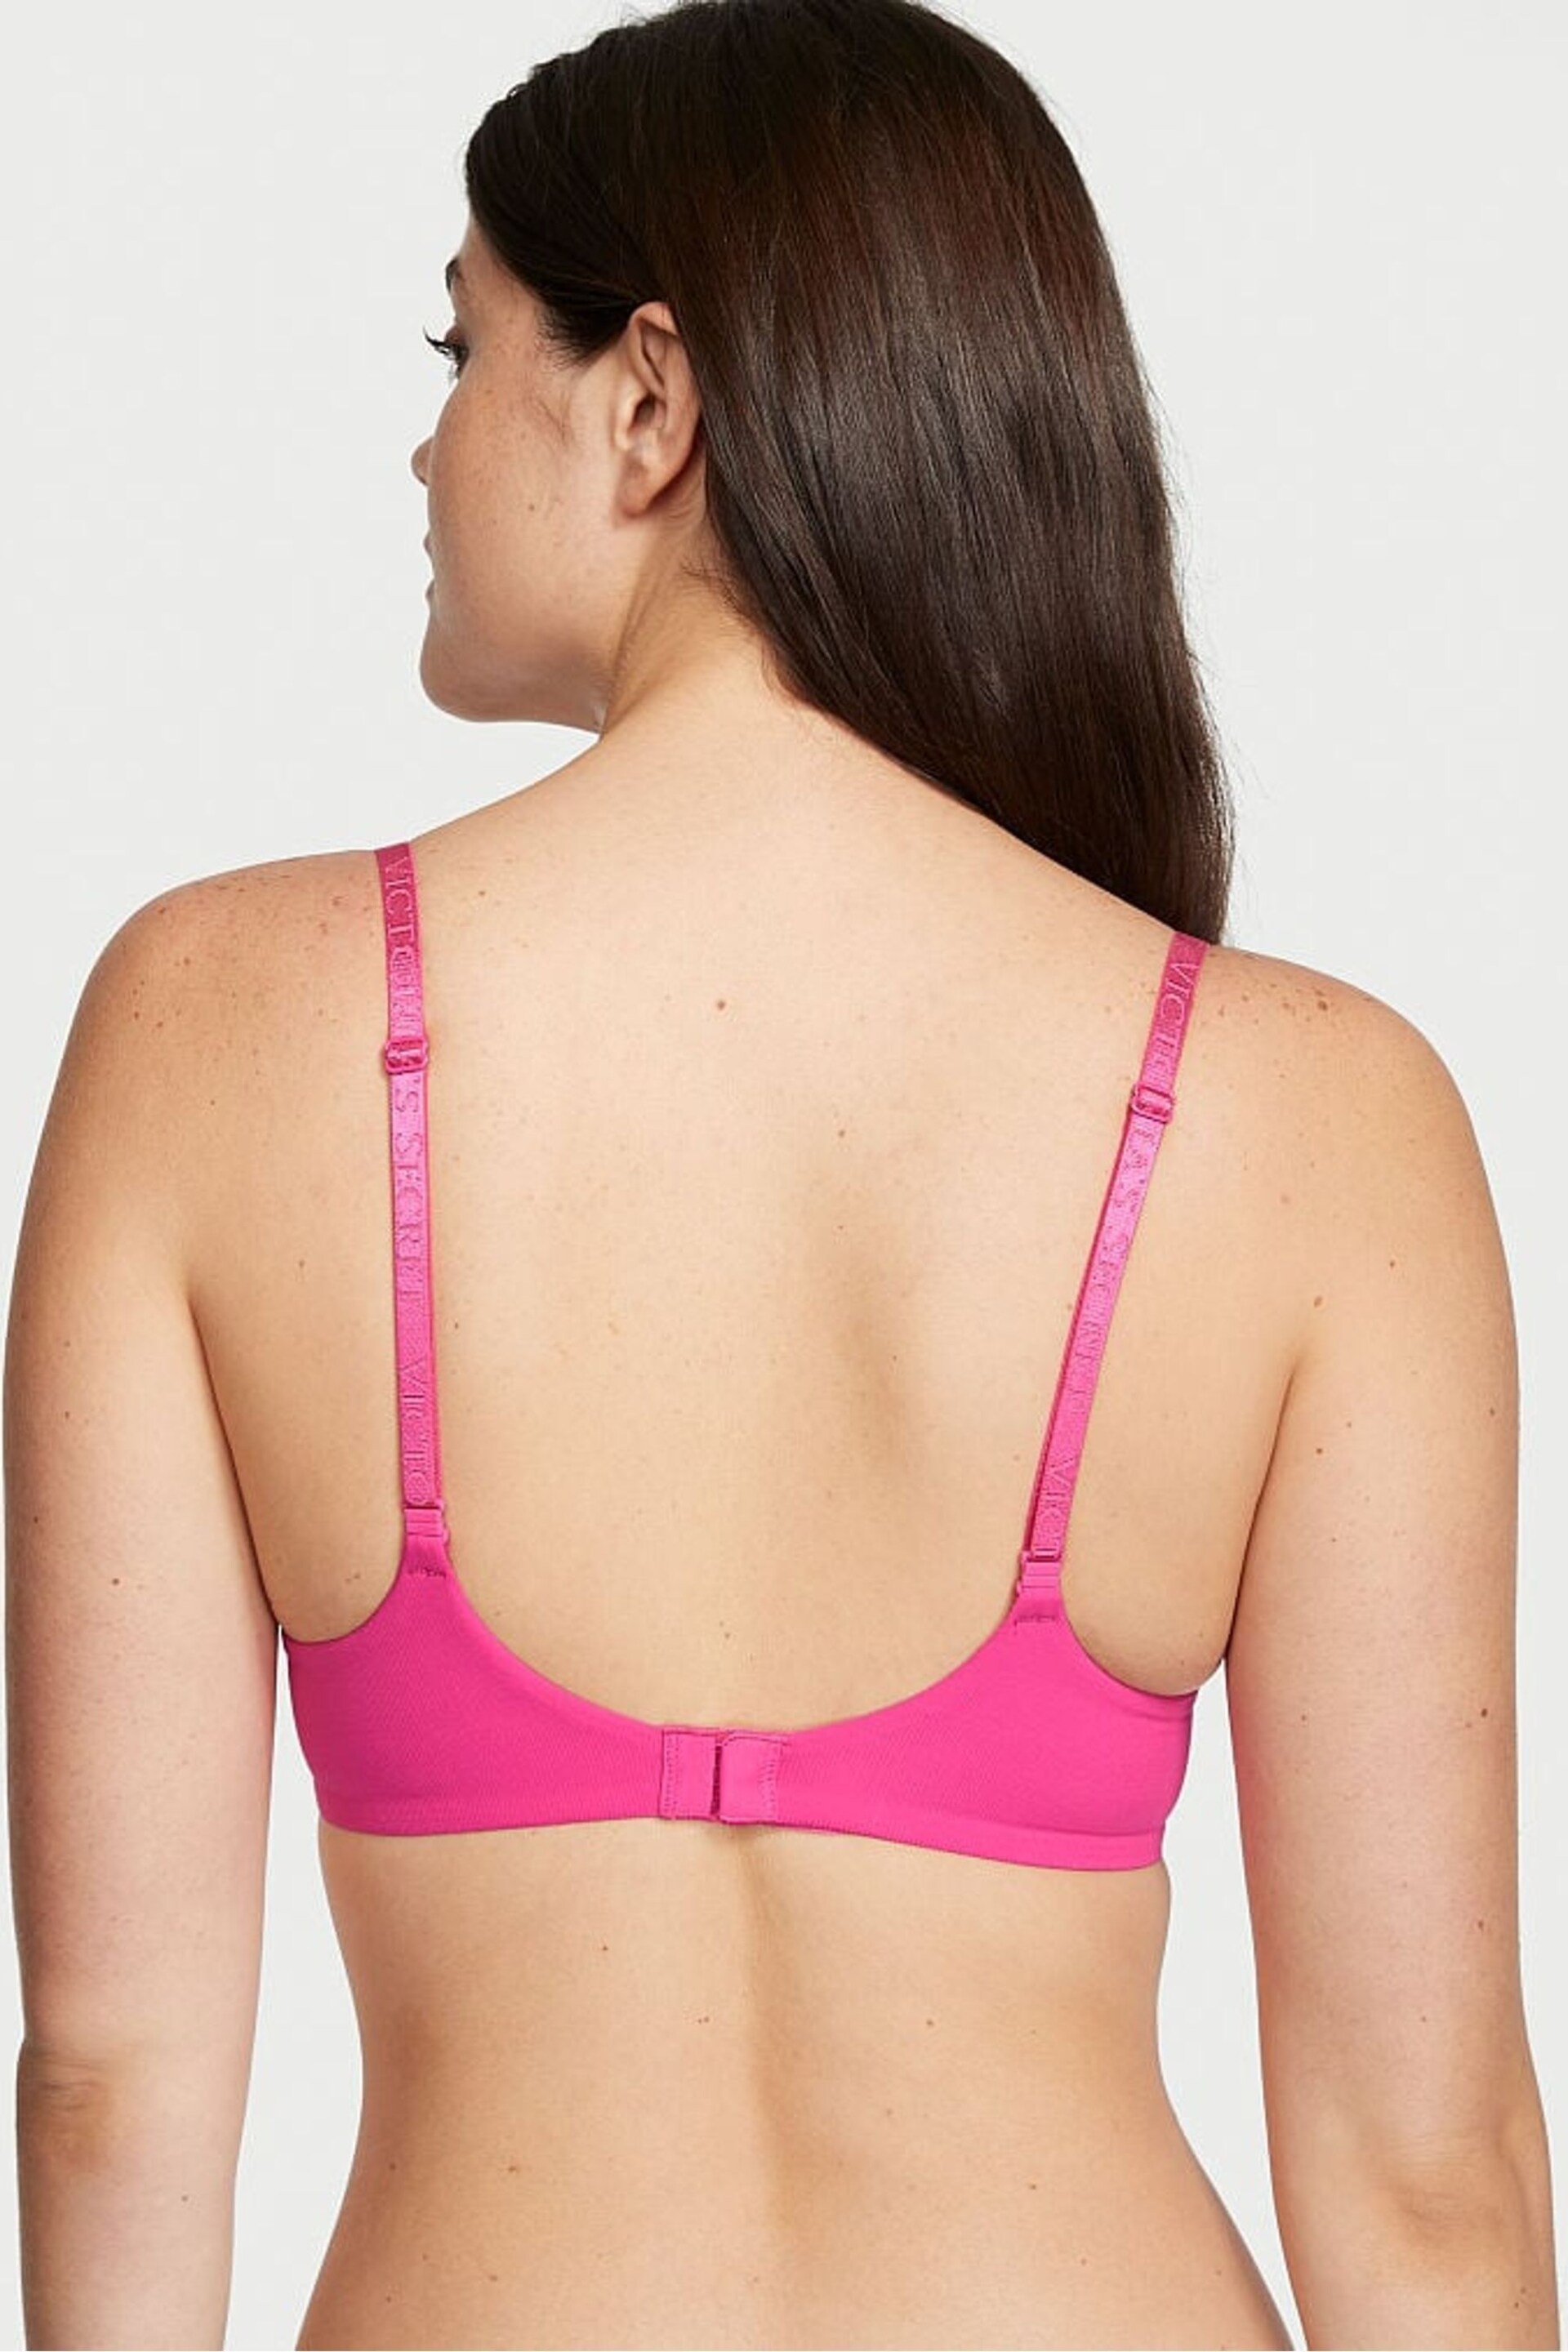 Victoria's Secret Pink Fever Smooth Lightly Lined Non Wired T-Shirt Bra - Image 2 of 3